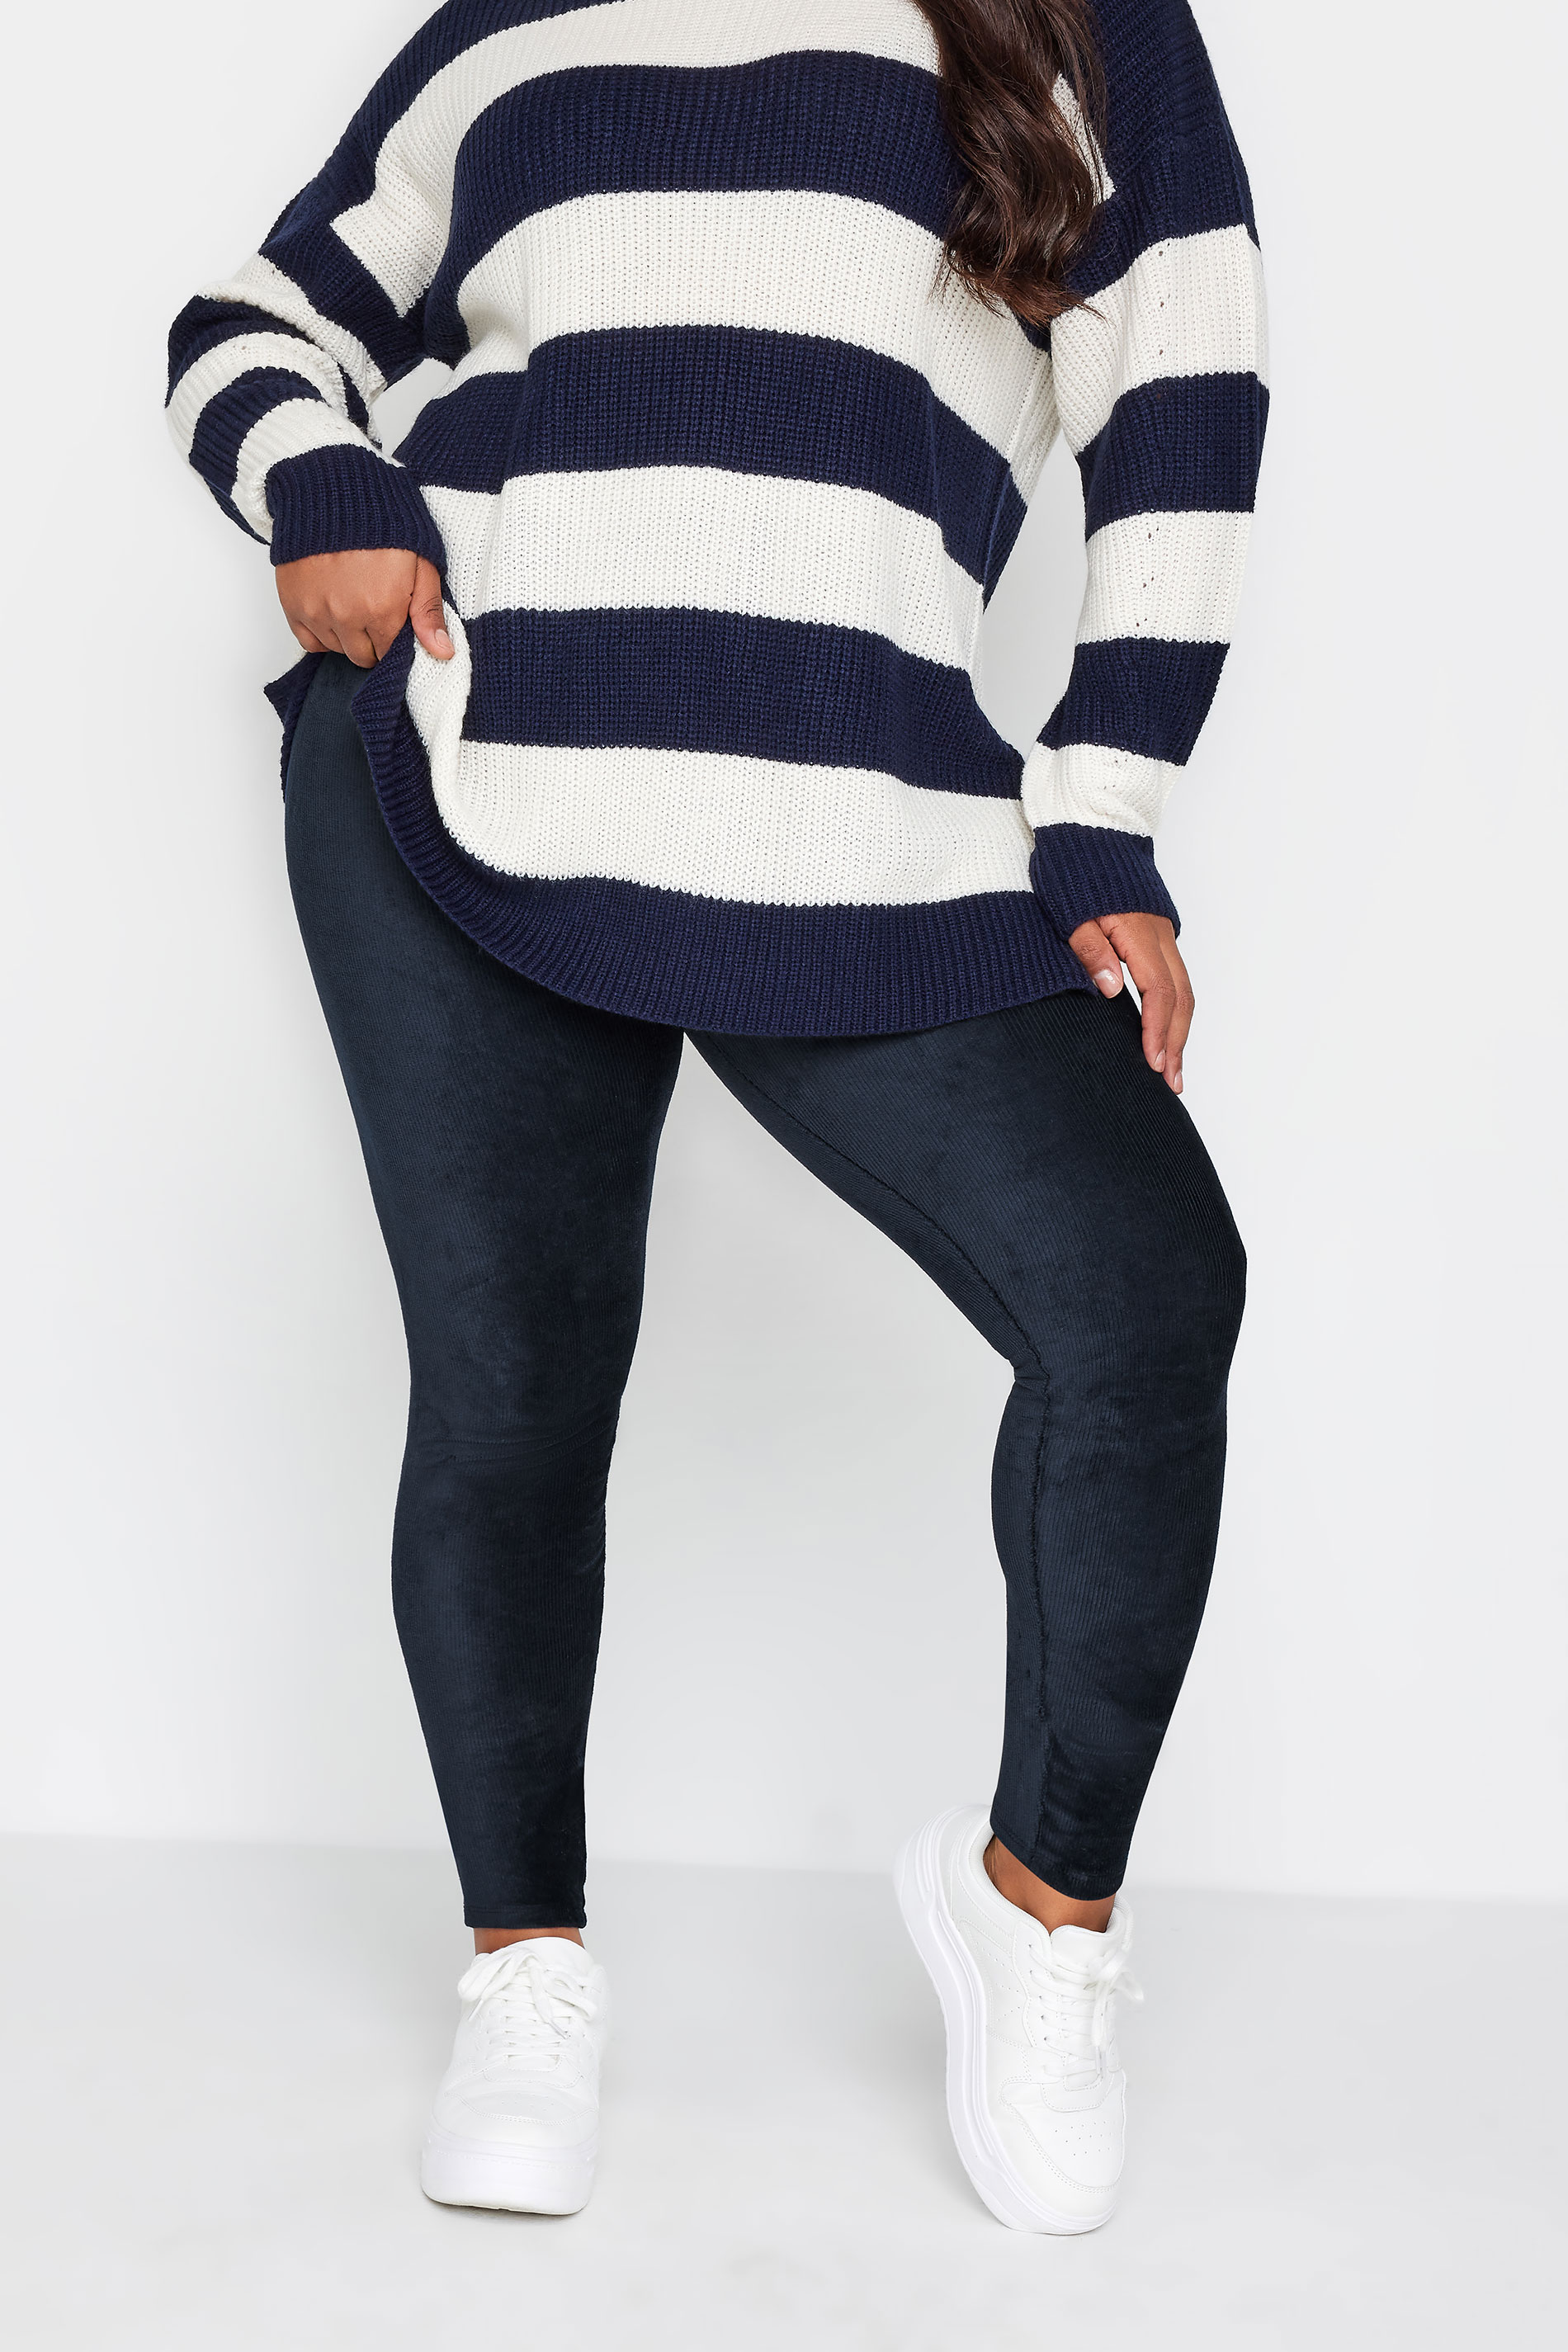 YOURS Plus Size Navy Blue Cord Leggings | Yours Clothing 2